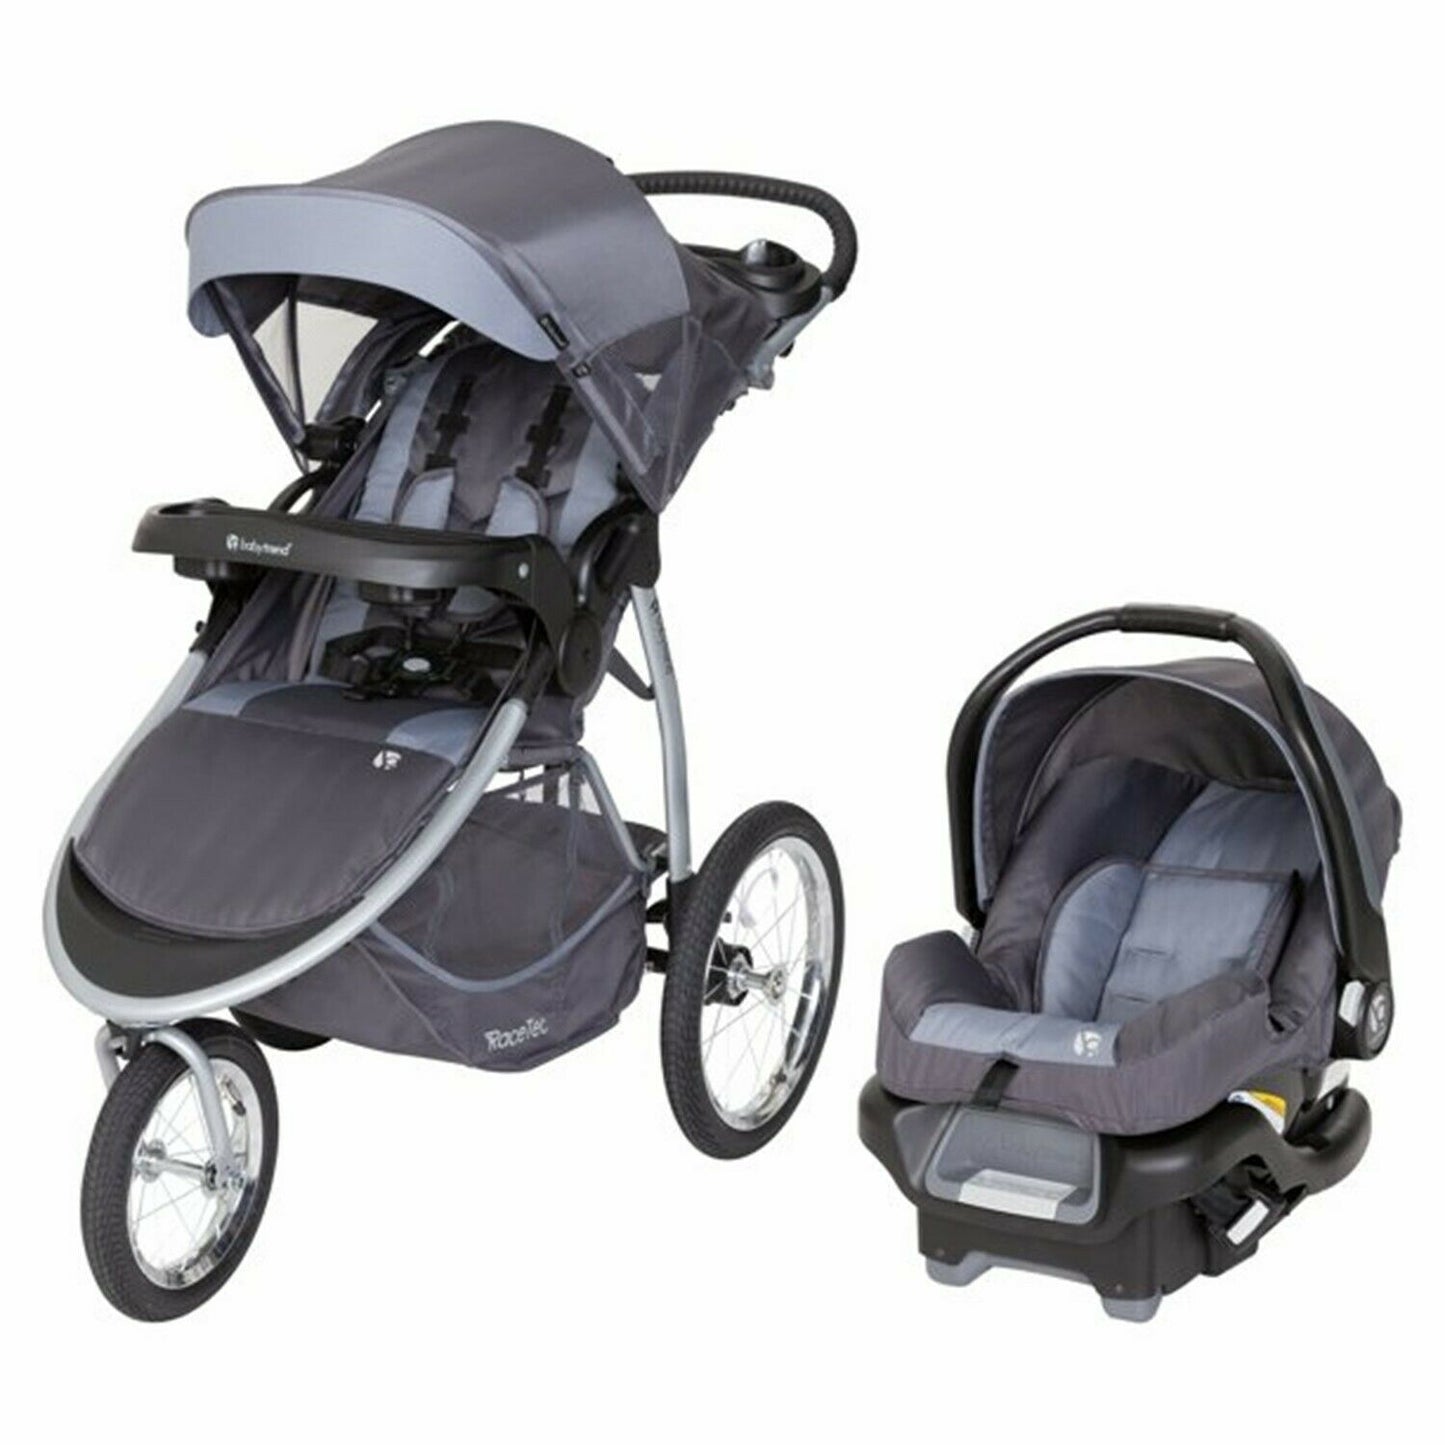 Baby Trend Stroller with Car Seat Expedition Race Tec Travel System Combo